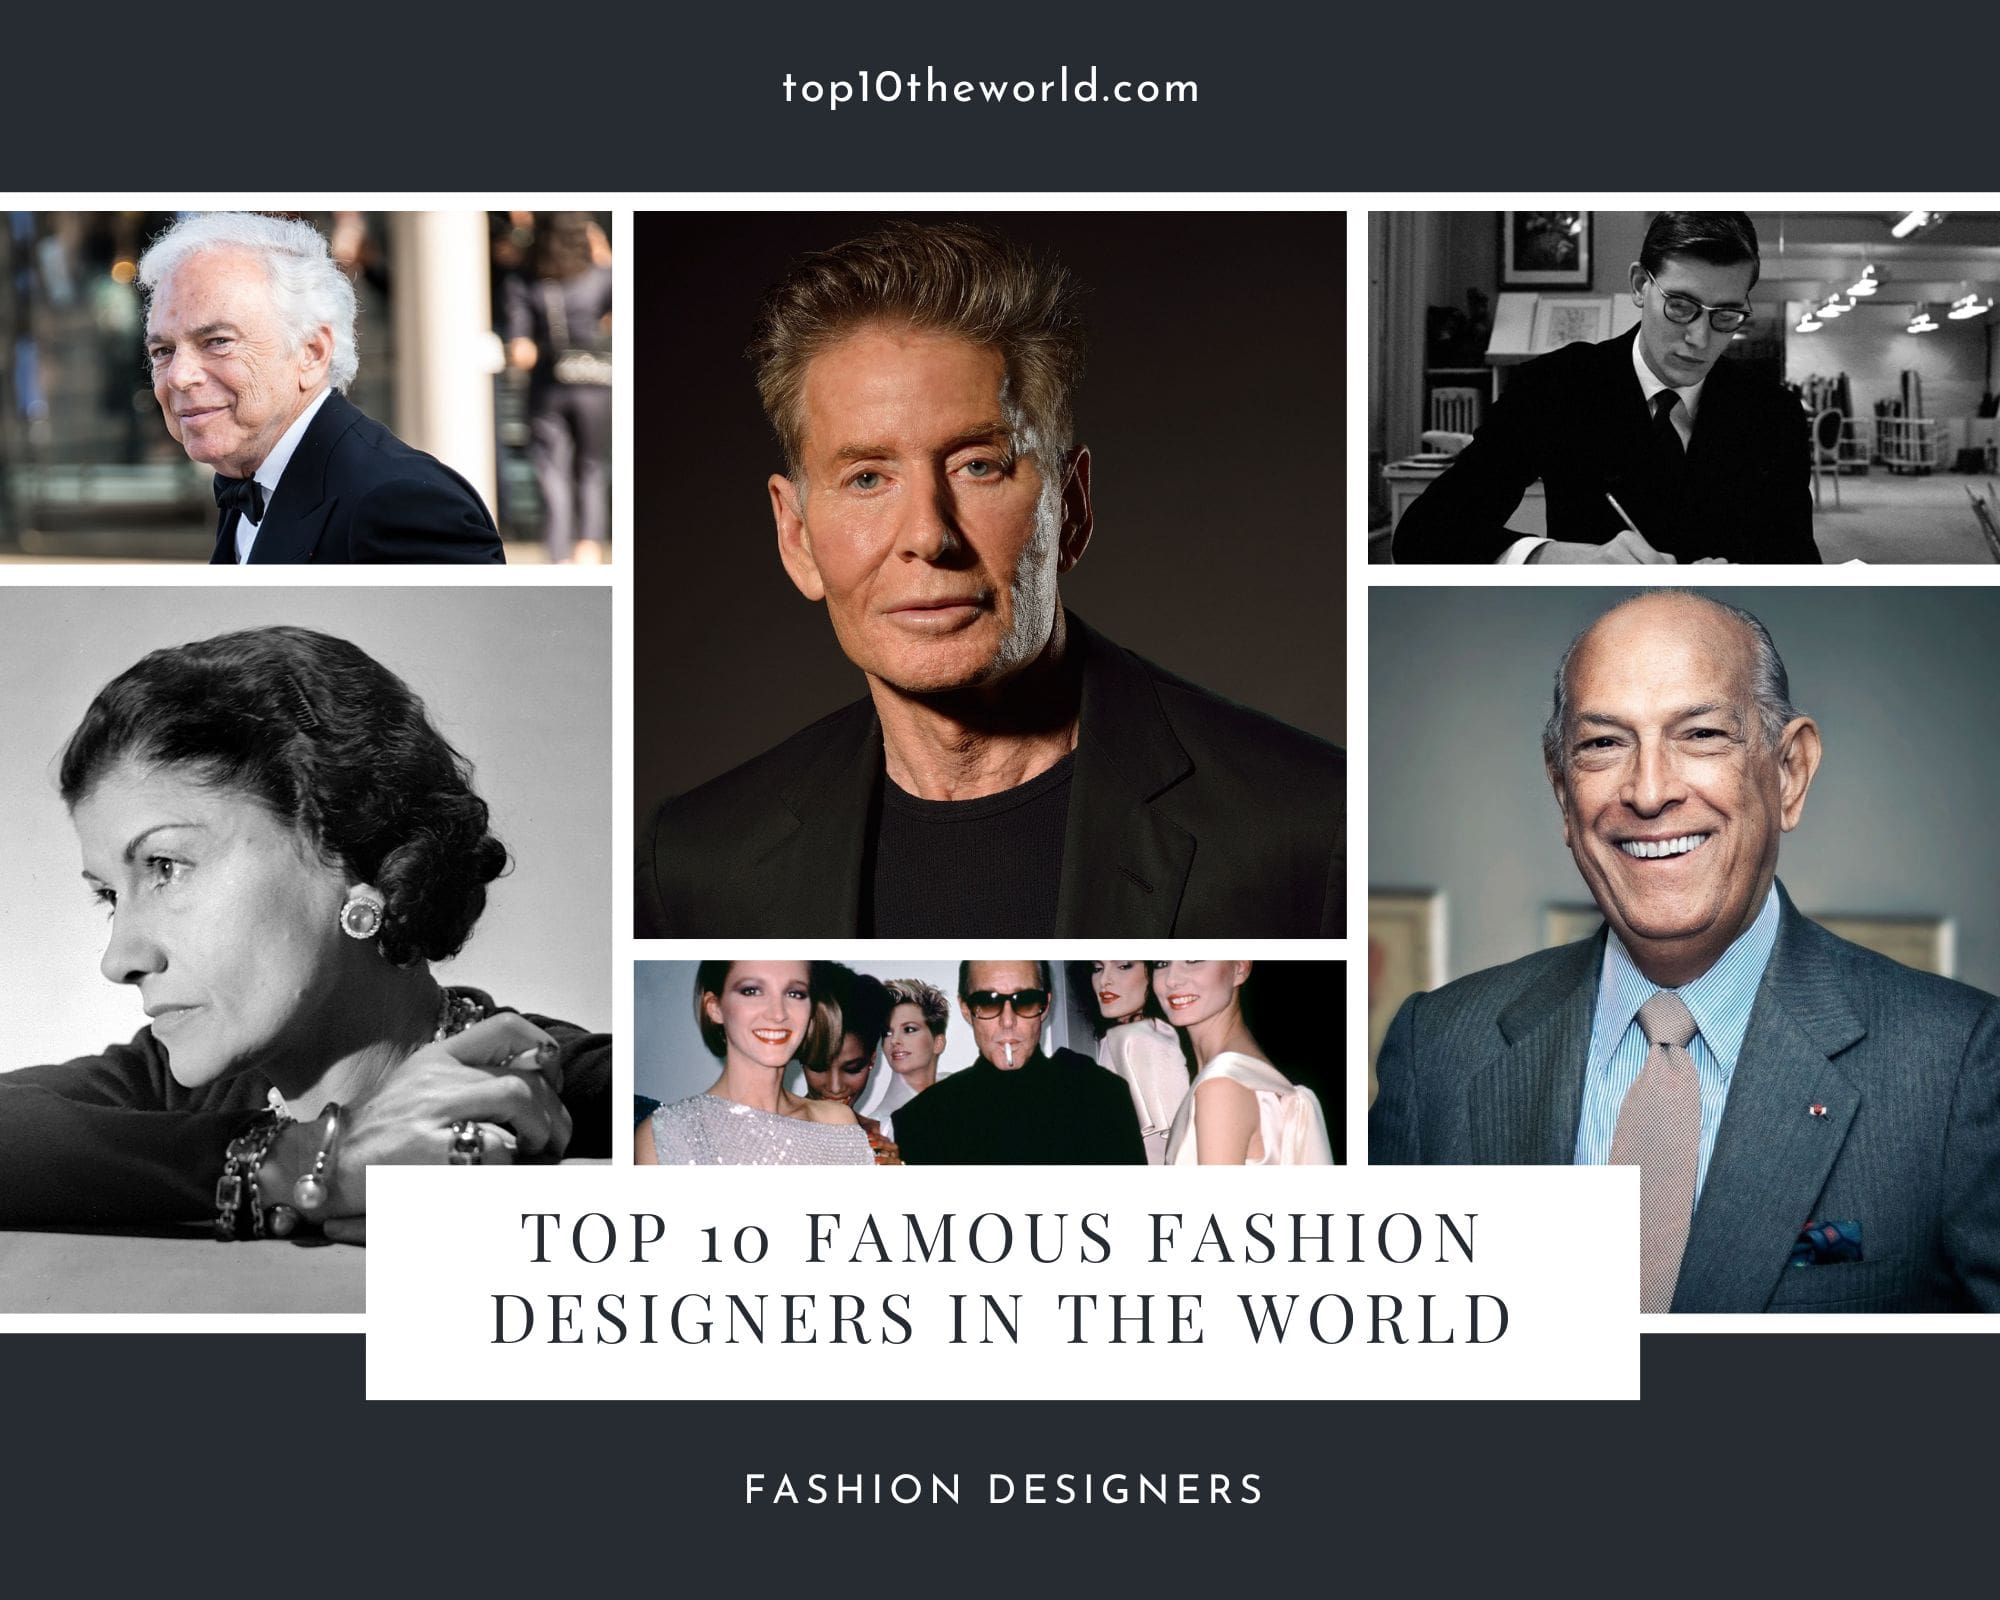 Top 10 Famous Fashion Designers in the World